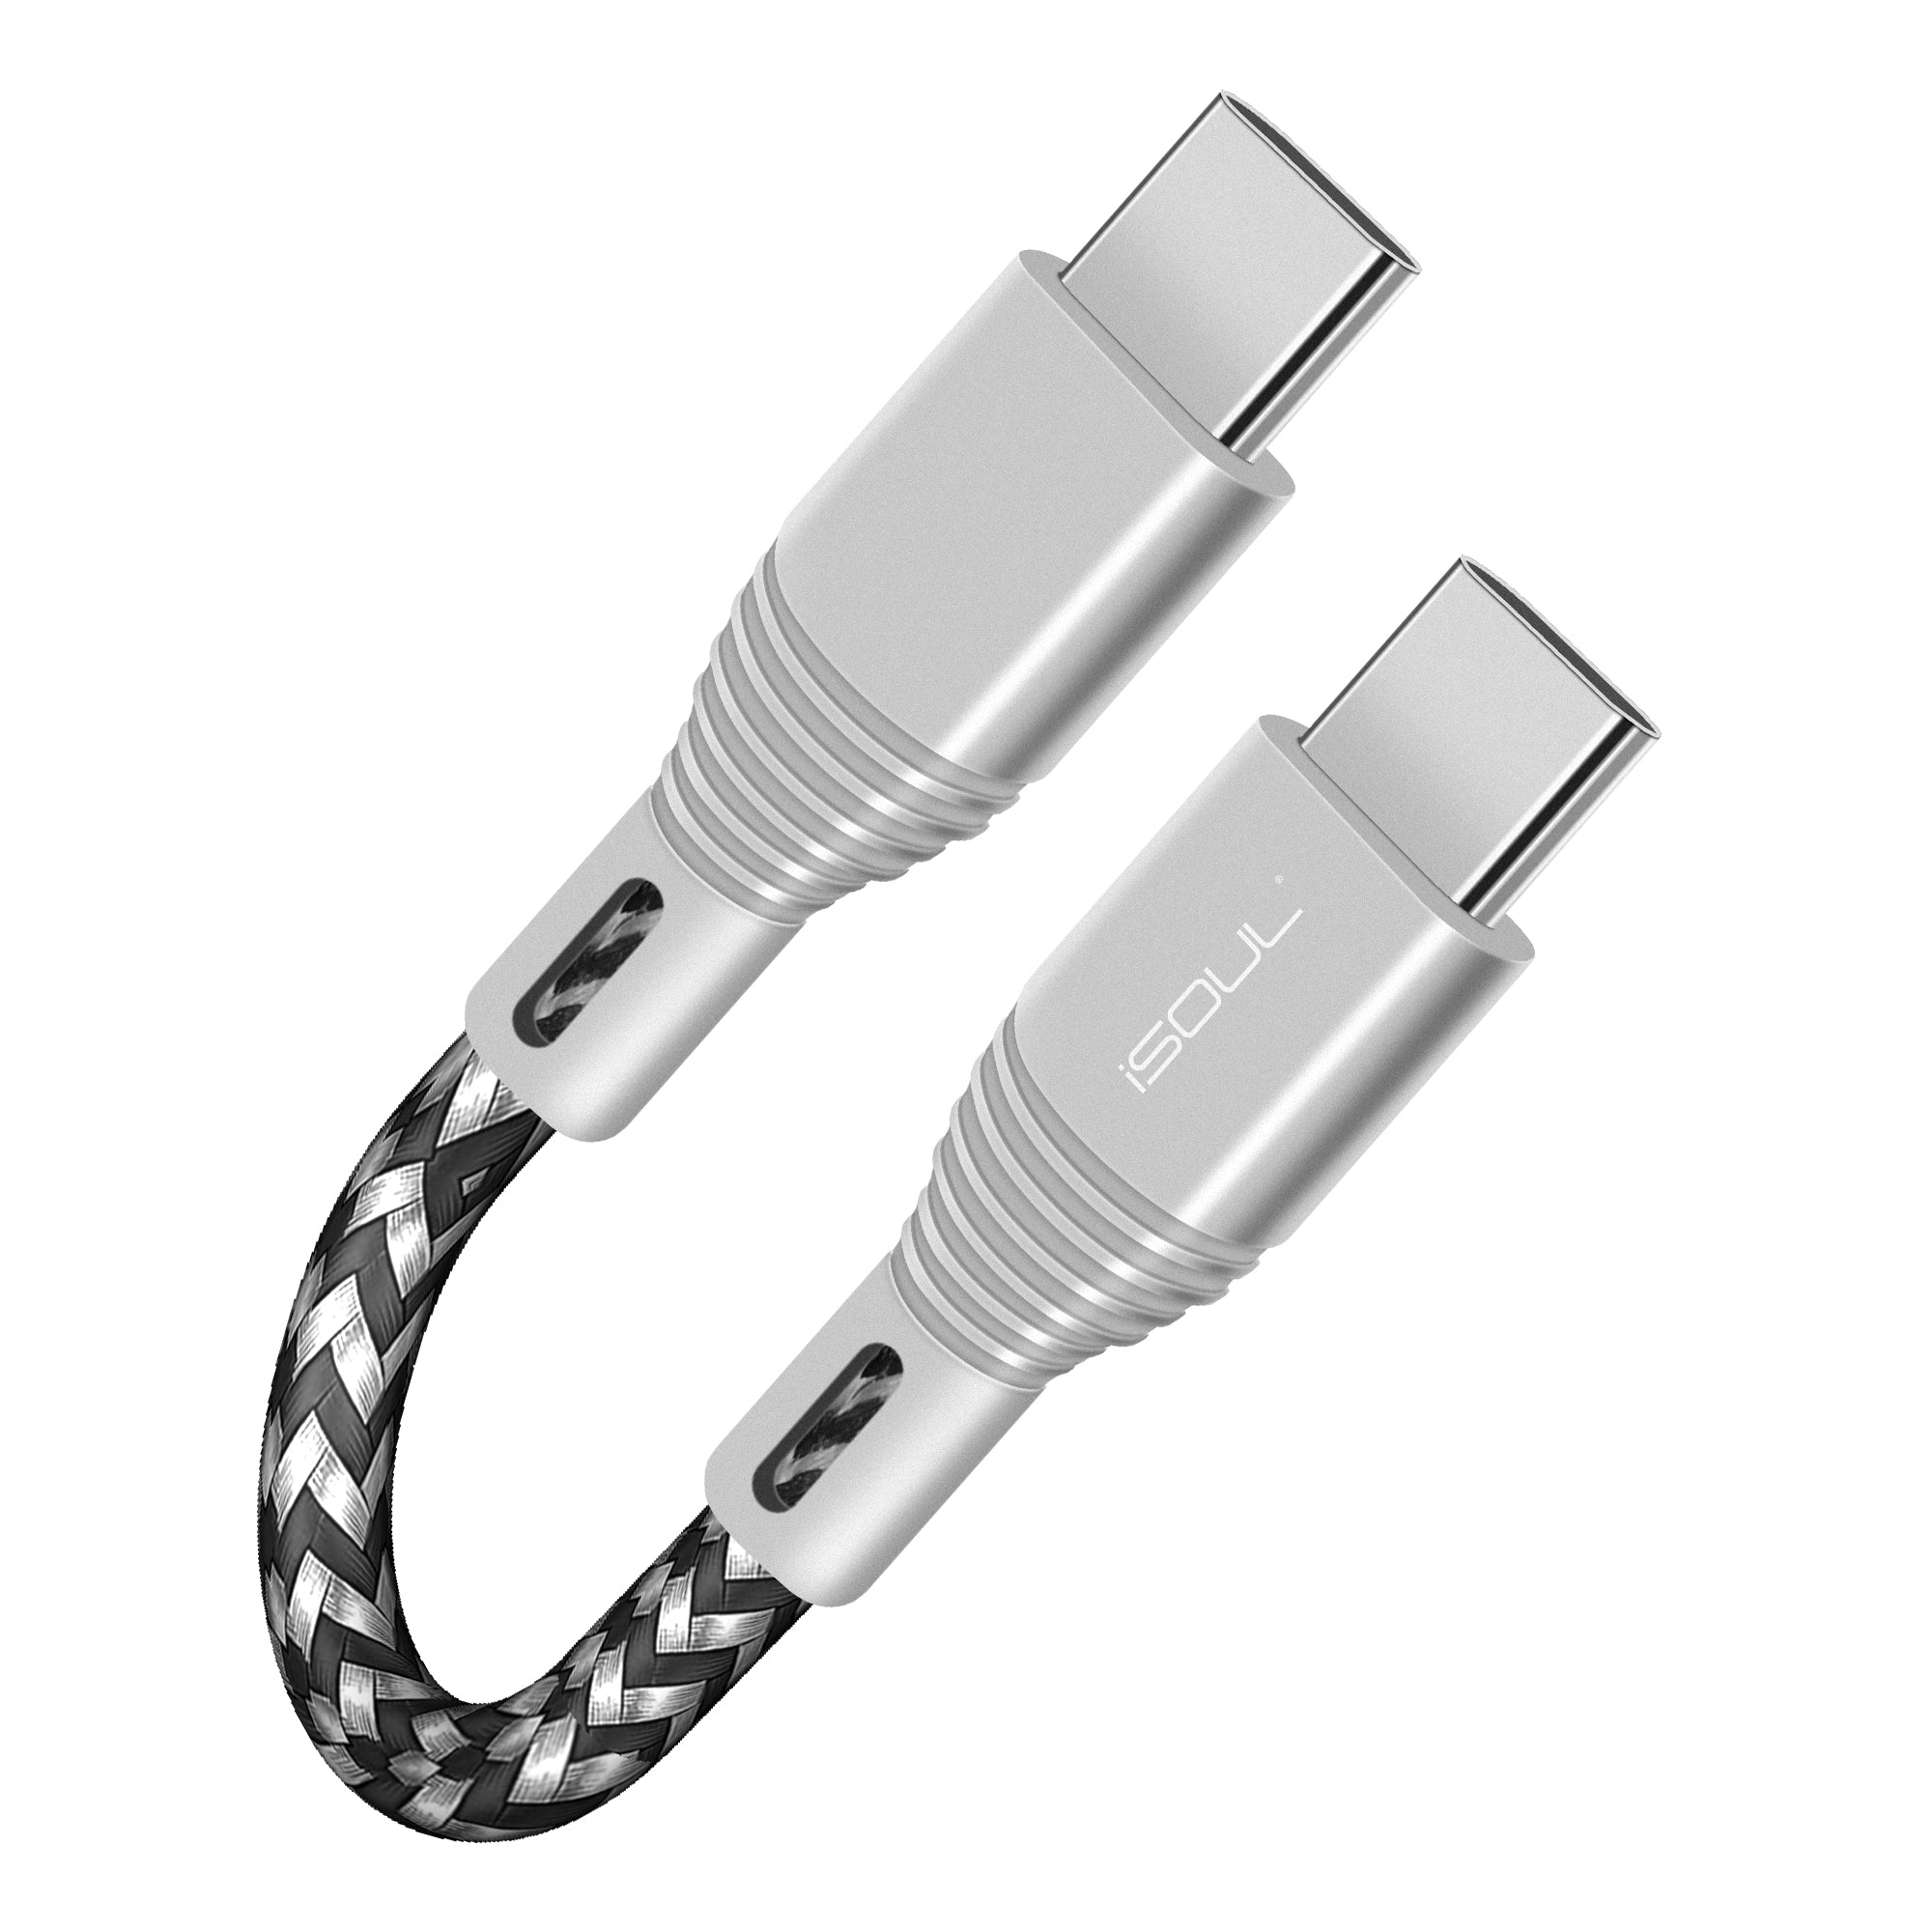 iSOUL Premium USB C to C Cable PD 60W 3A Type C Charger Data Sync Lead